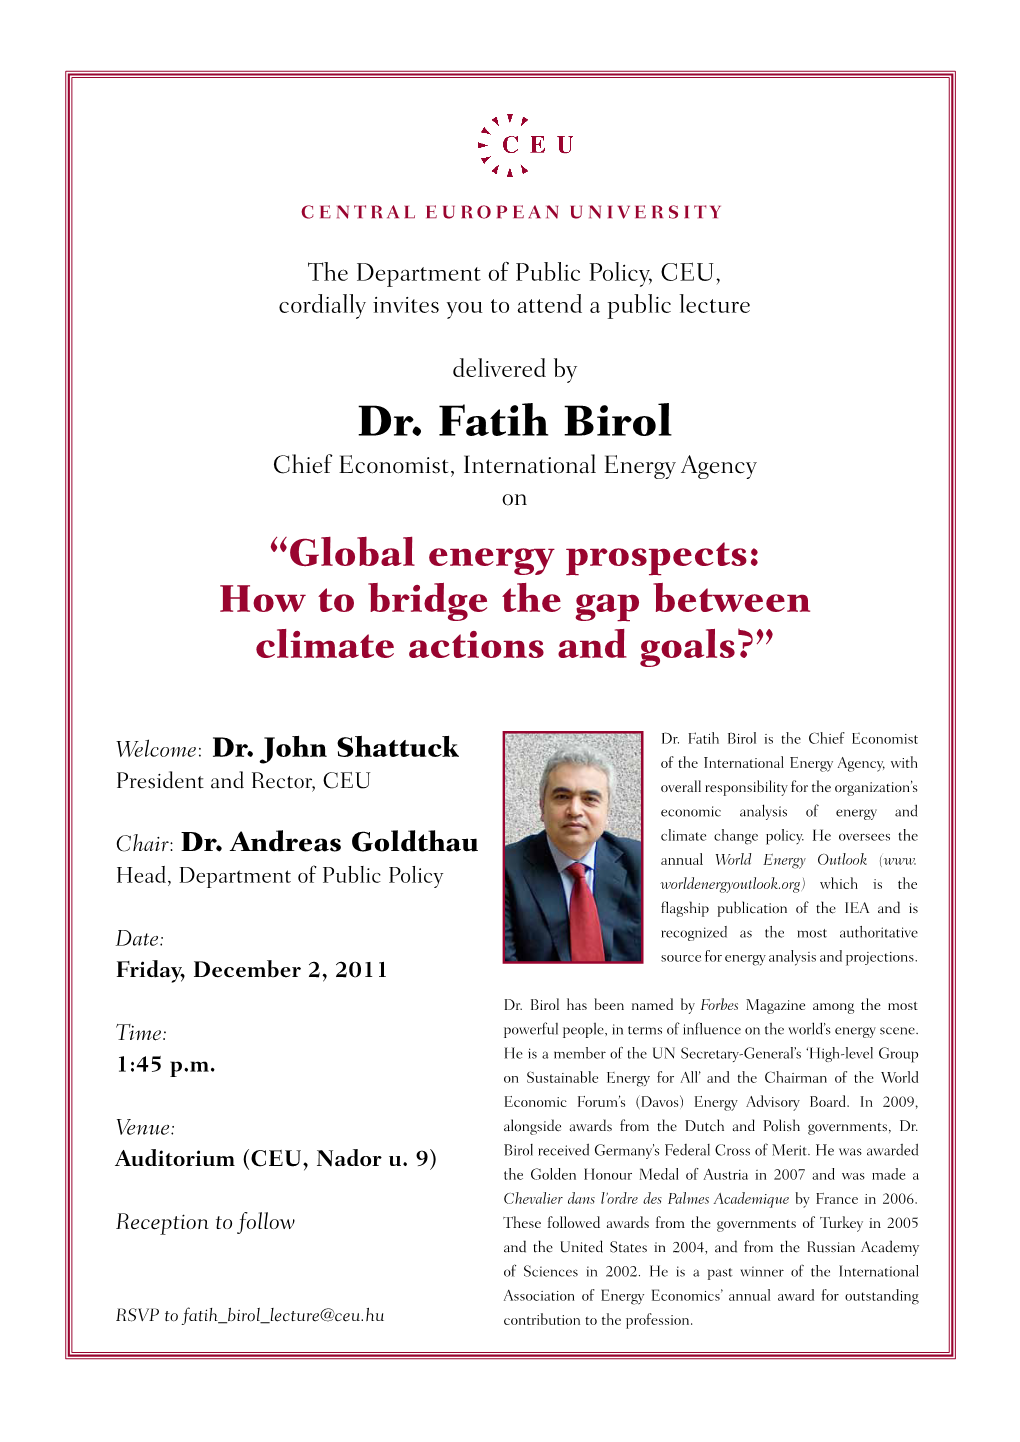 Dr. Fatih Birol Chief Economist, International Energy Agency on “Global Energy Prospects: How to Bridge the Gap Between Climate Actions and Goals?”